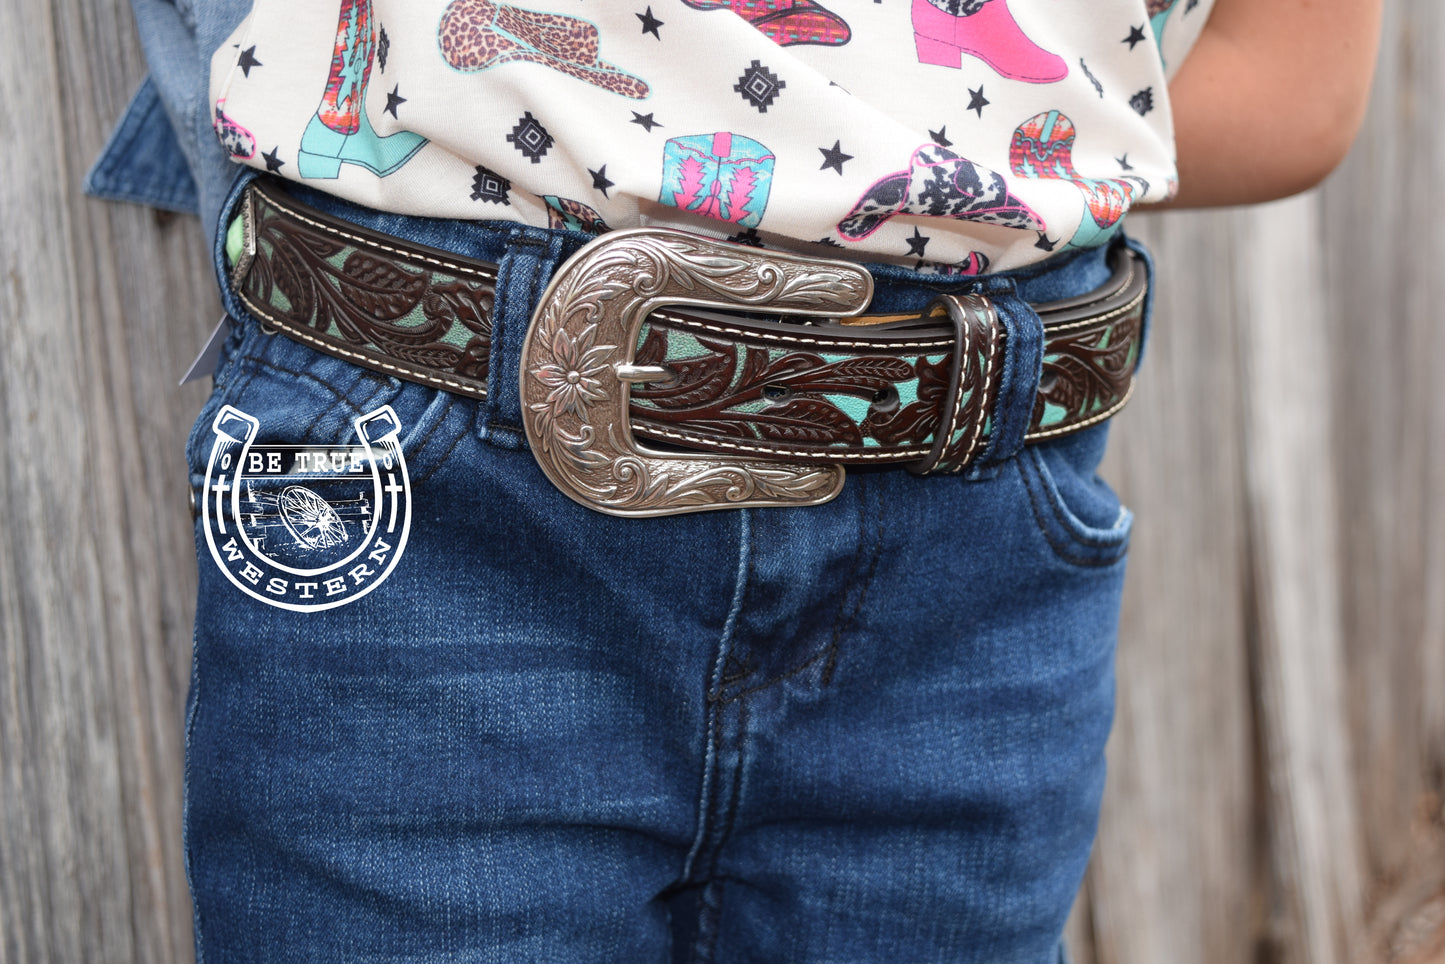 Girls Brown Floral Belt with Painted Turquoise Inlay